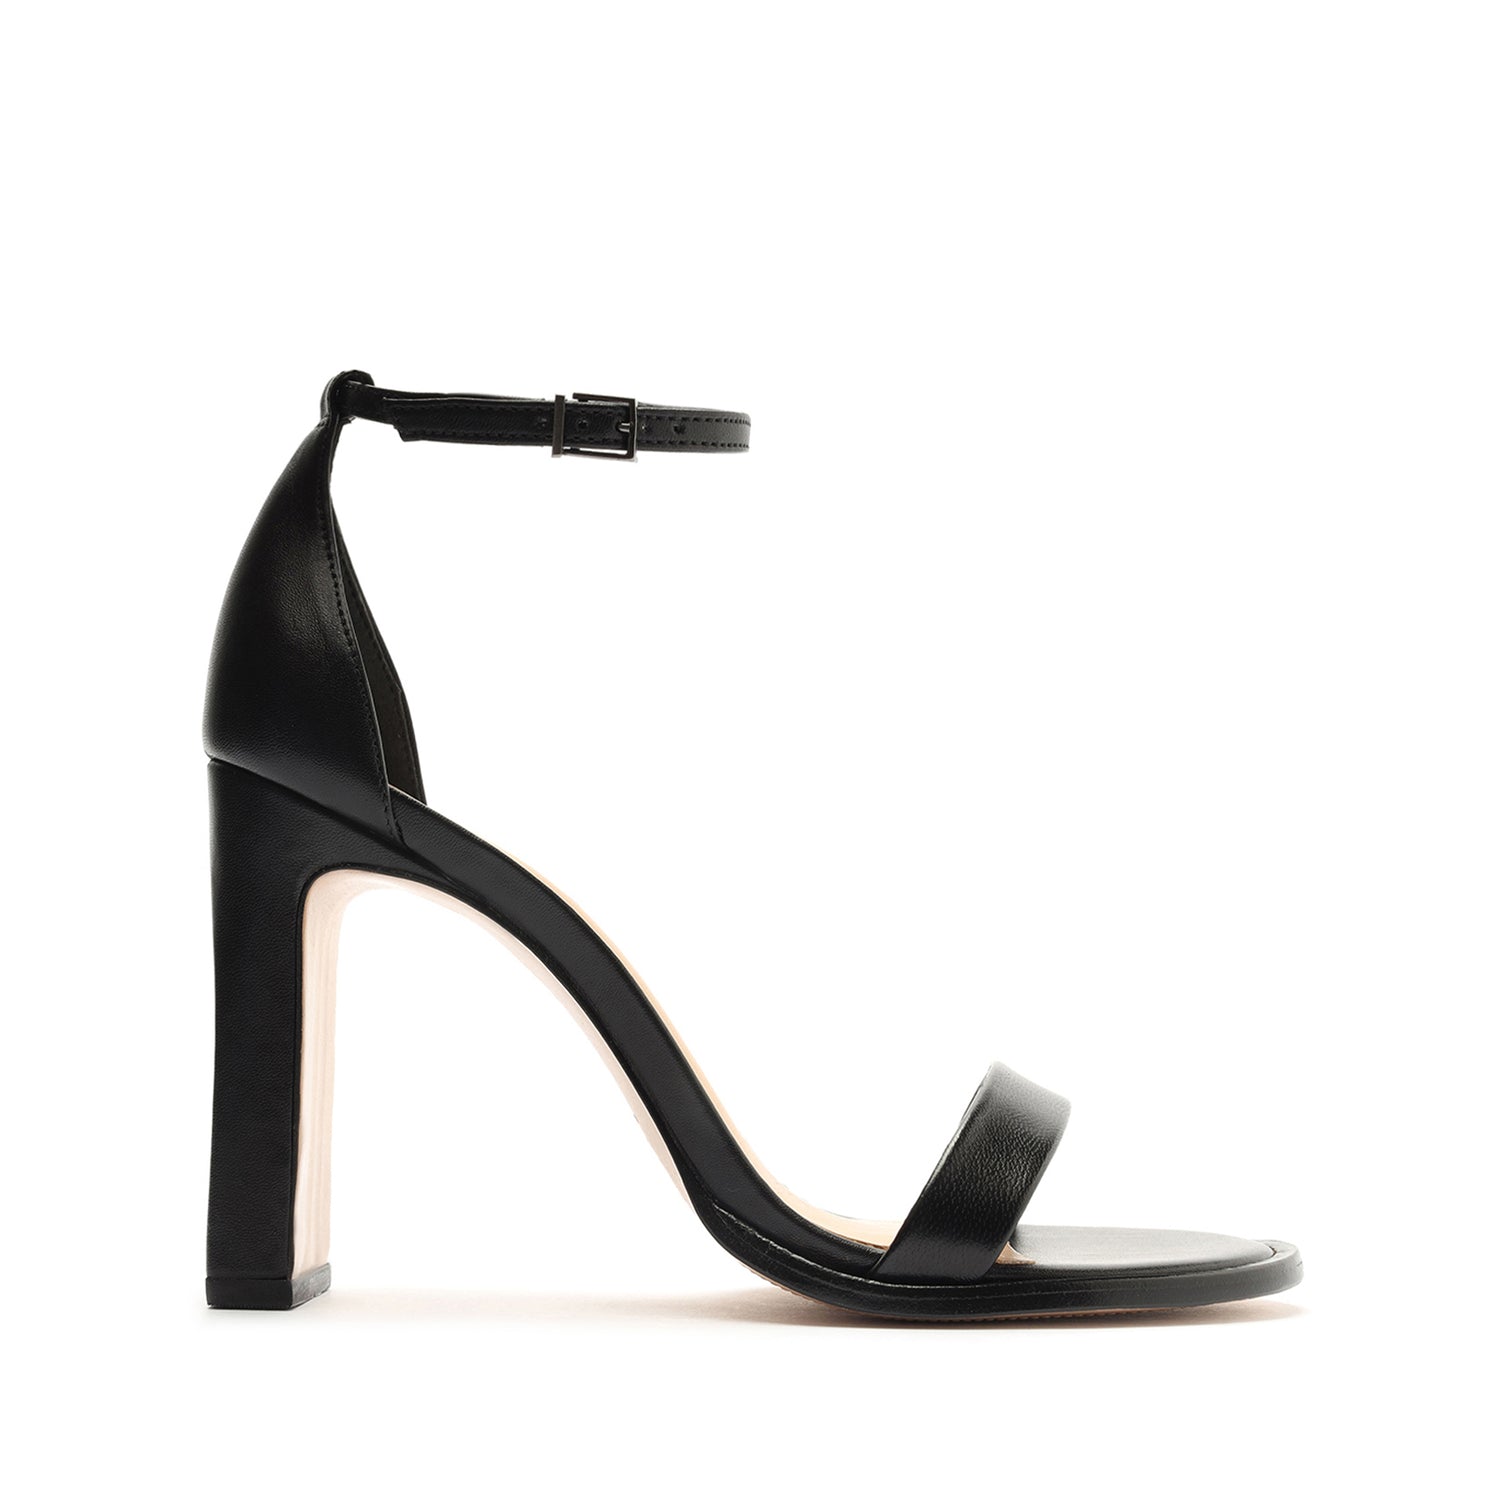 Suzy Lee Nappa Leather Sandal Sandals Pre Fall 22 5 Black Nappa Leather - Schutz Shoes